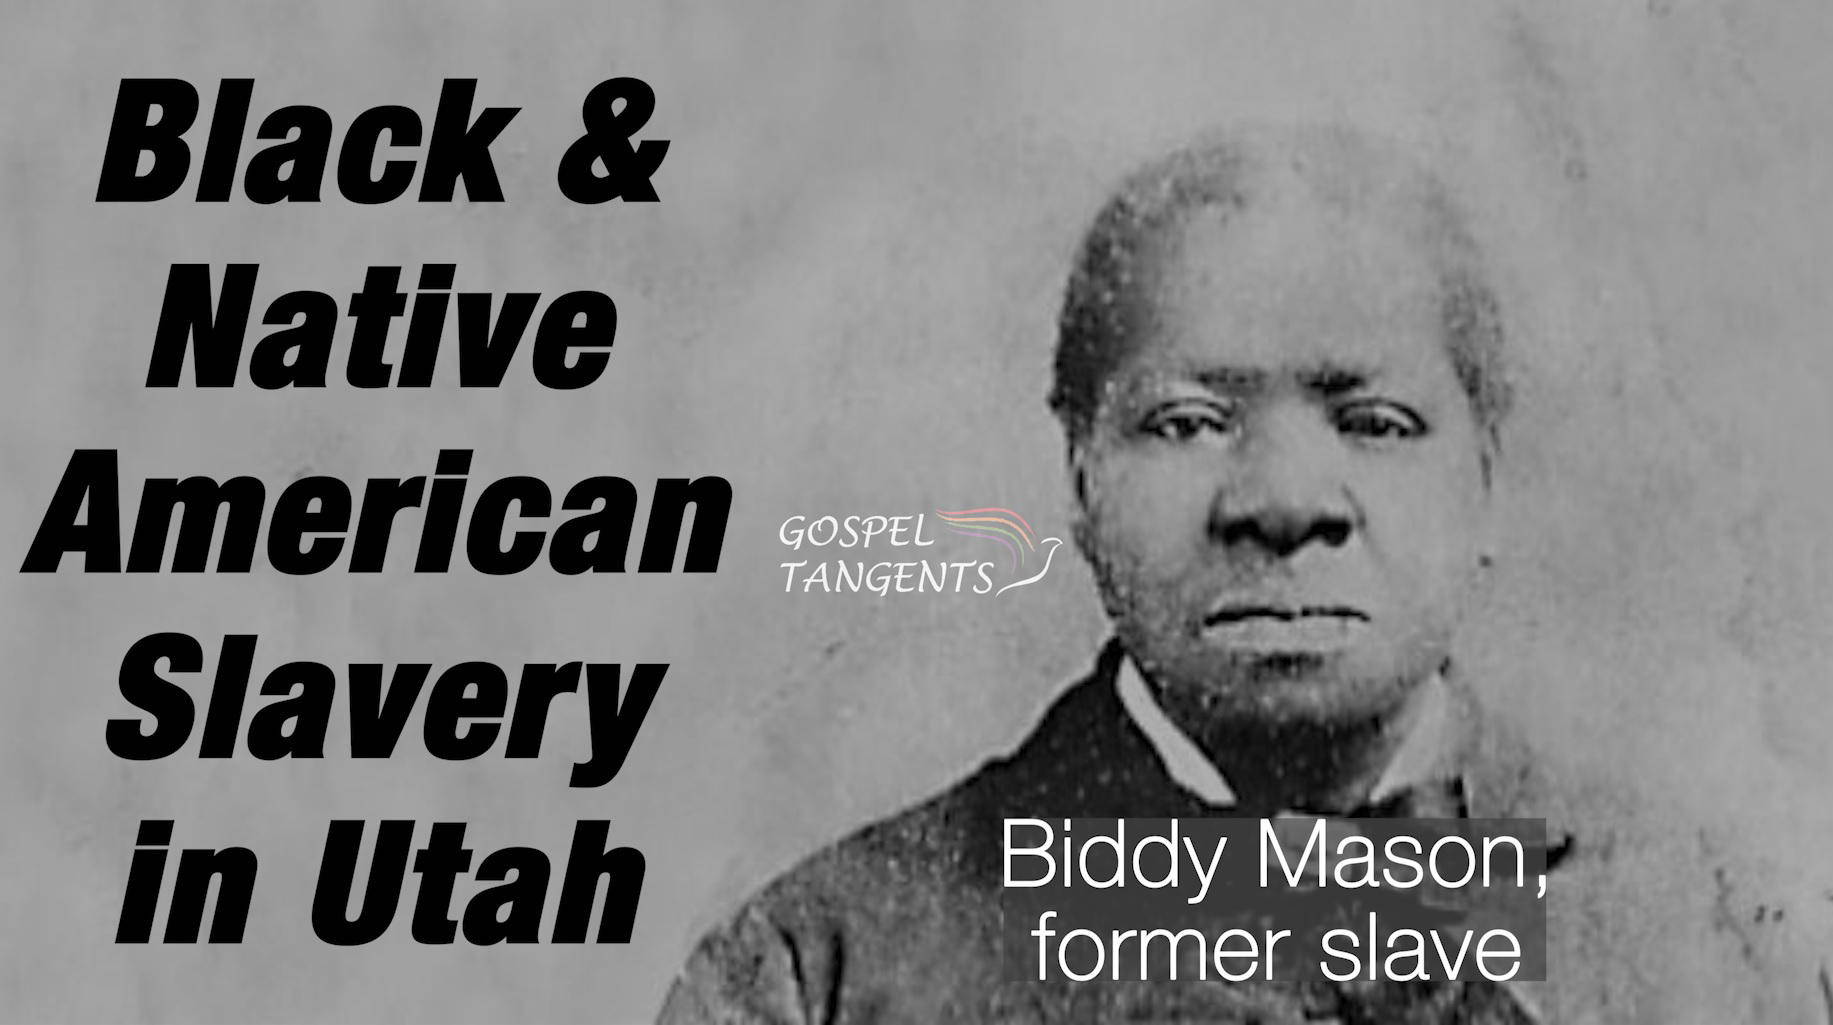 Biddy Mason was taken as a slave from Utah to California where she sued for her freedom. Dr. Sally Gordon tells more about Black & Indian slavery in Utah.